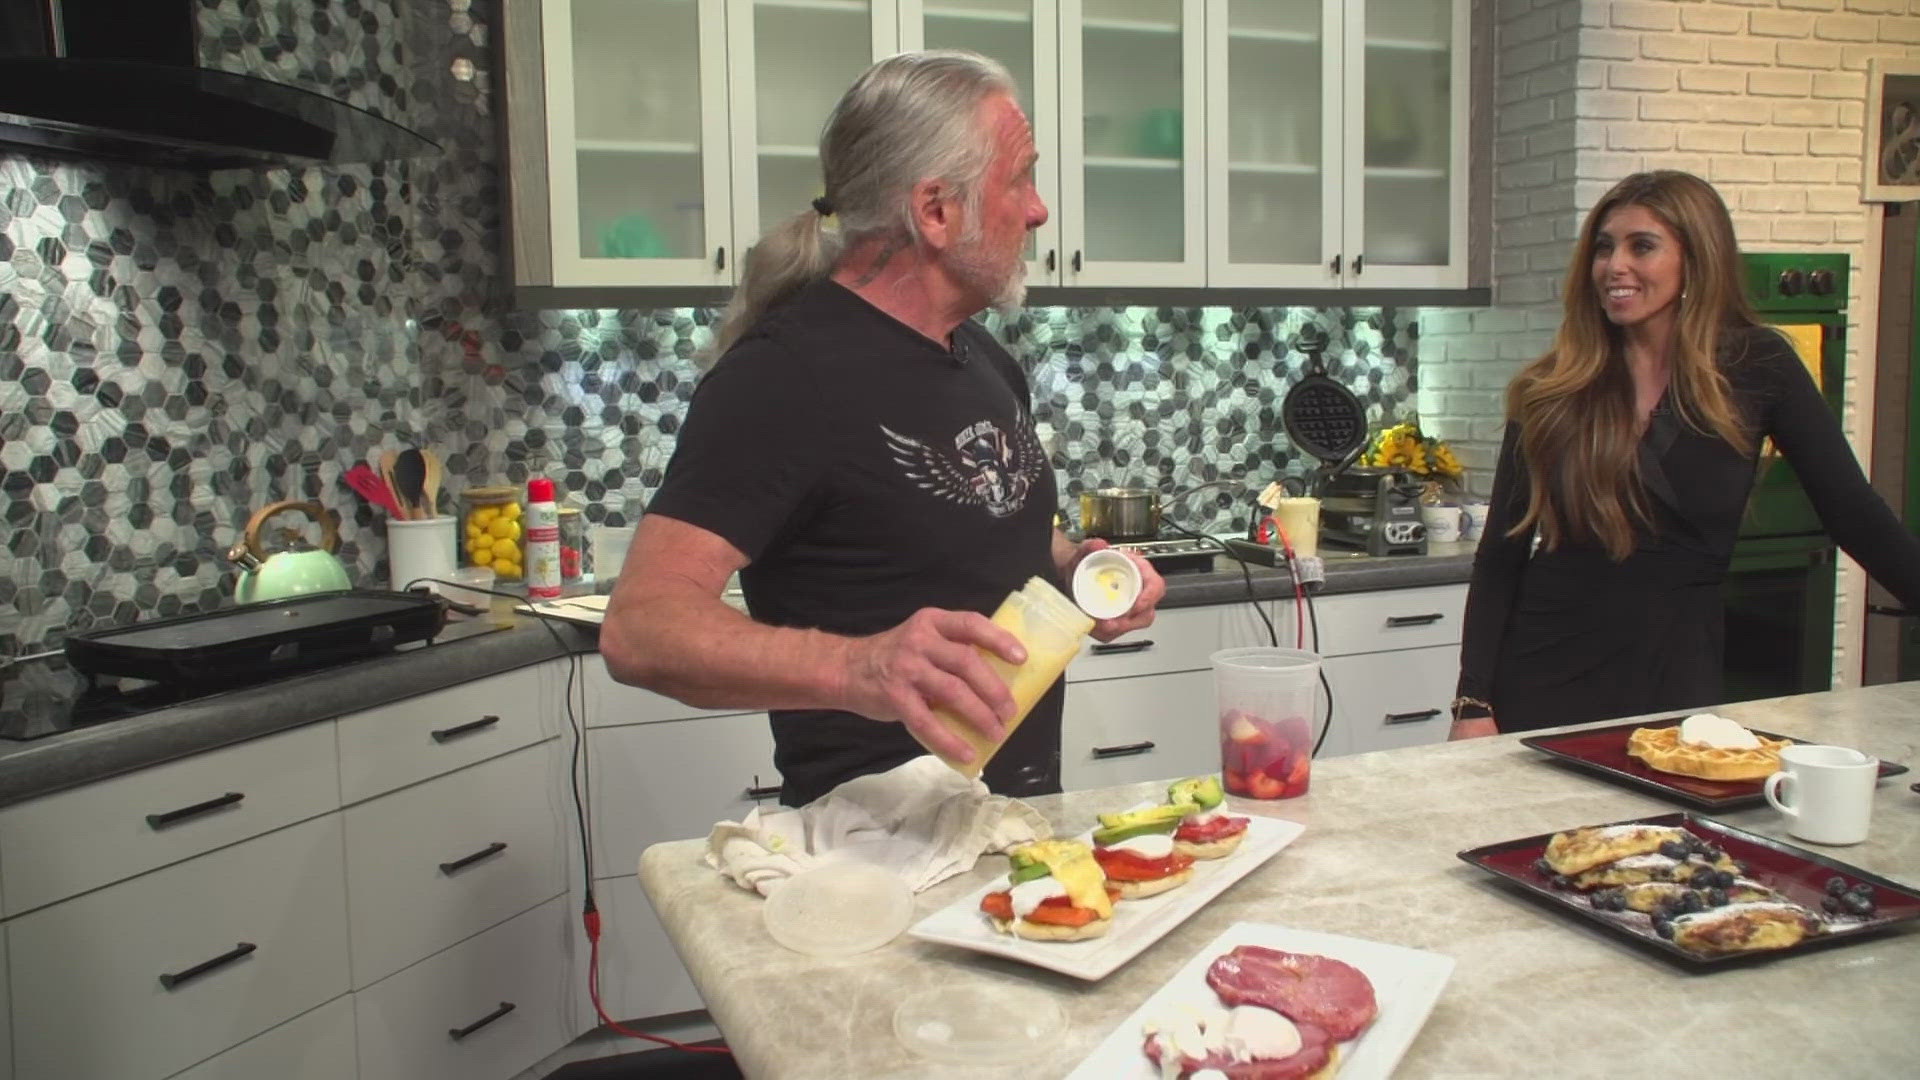 Local chef Jim Pittenger with Biker Jim's Gourmet Dogs shares some Mother's Day breakfast ideas.